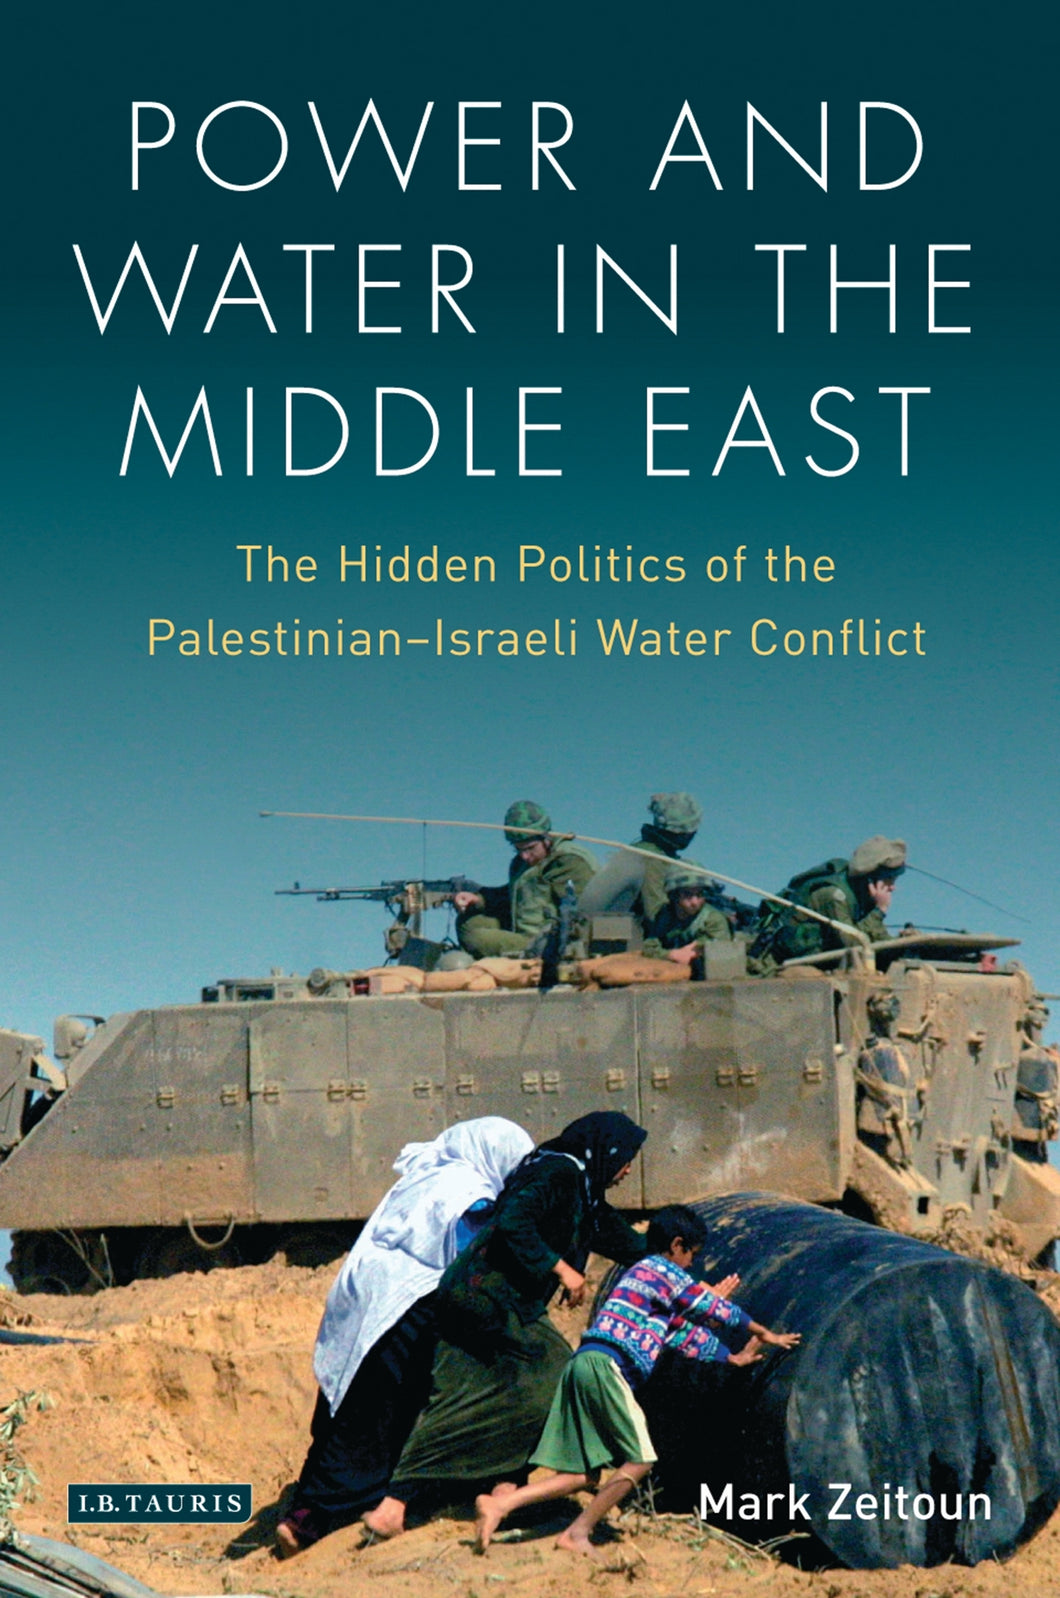 Power and Water in the Middle East: The Hidden Politics of the Palestinian-Israeli Water Conflict